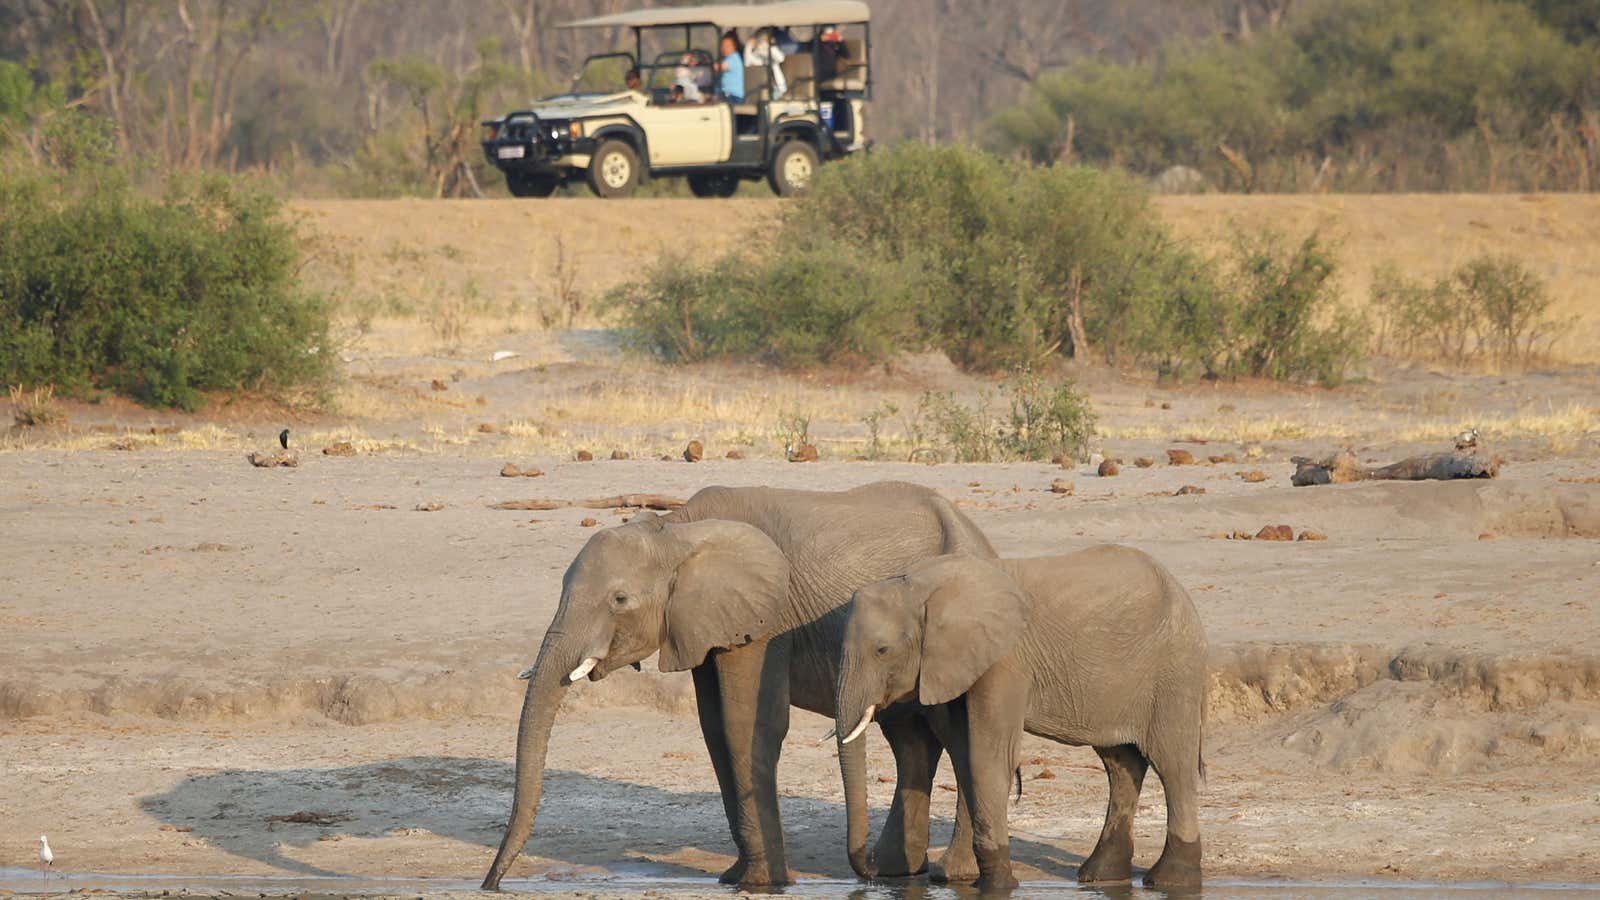 Tourists look at a group of elephants at Zimbabwe’s Hwange National Park. With an estimated 100,000 elephants, Zimbabwe has the second biggest elephant population in Africa after its neighbor Botswana.